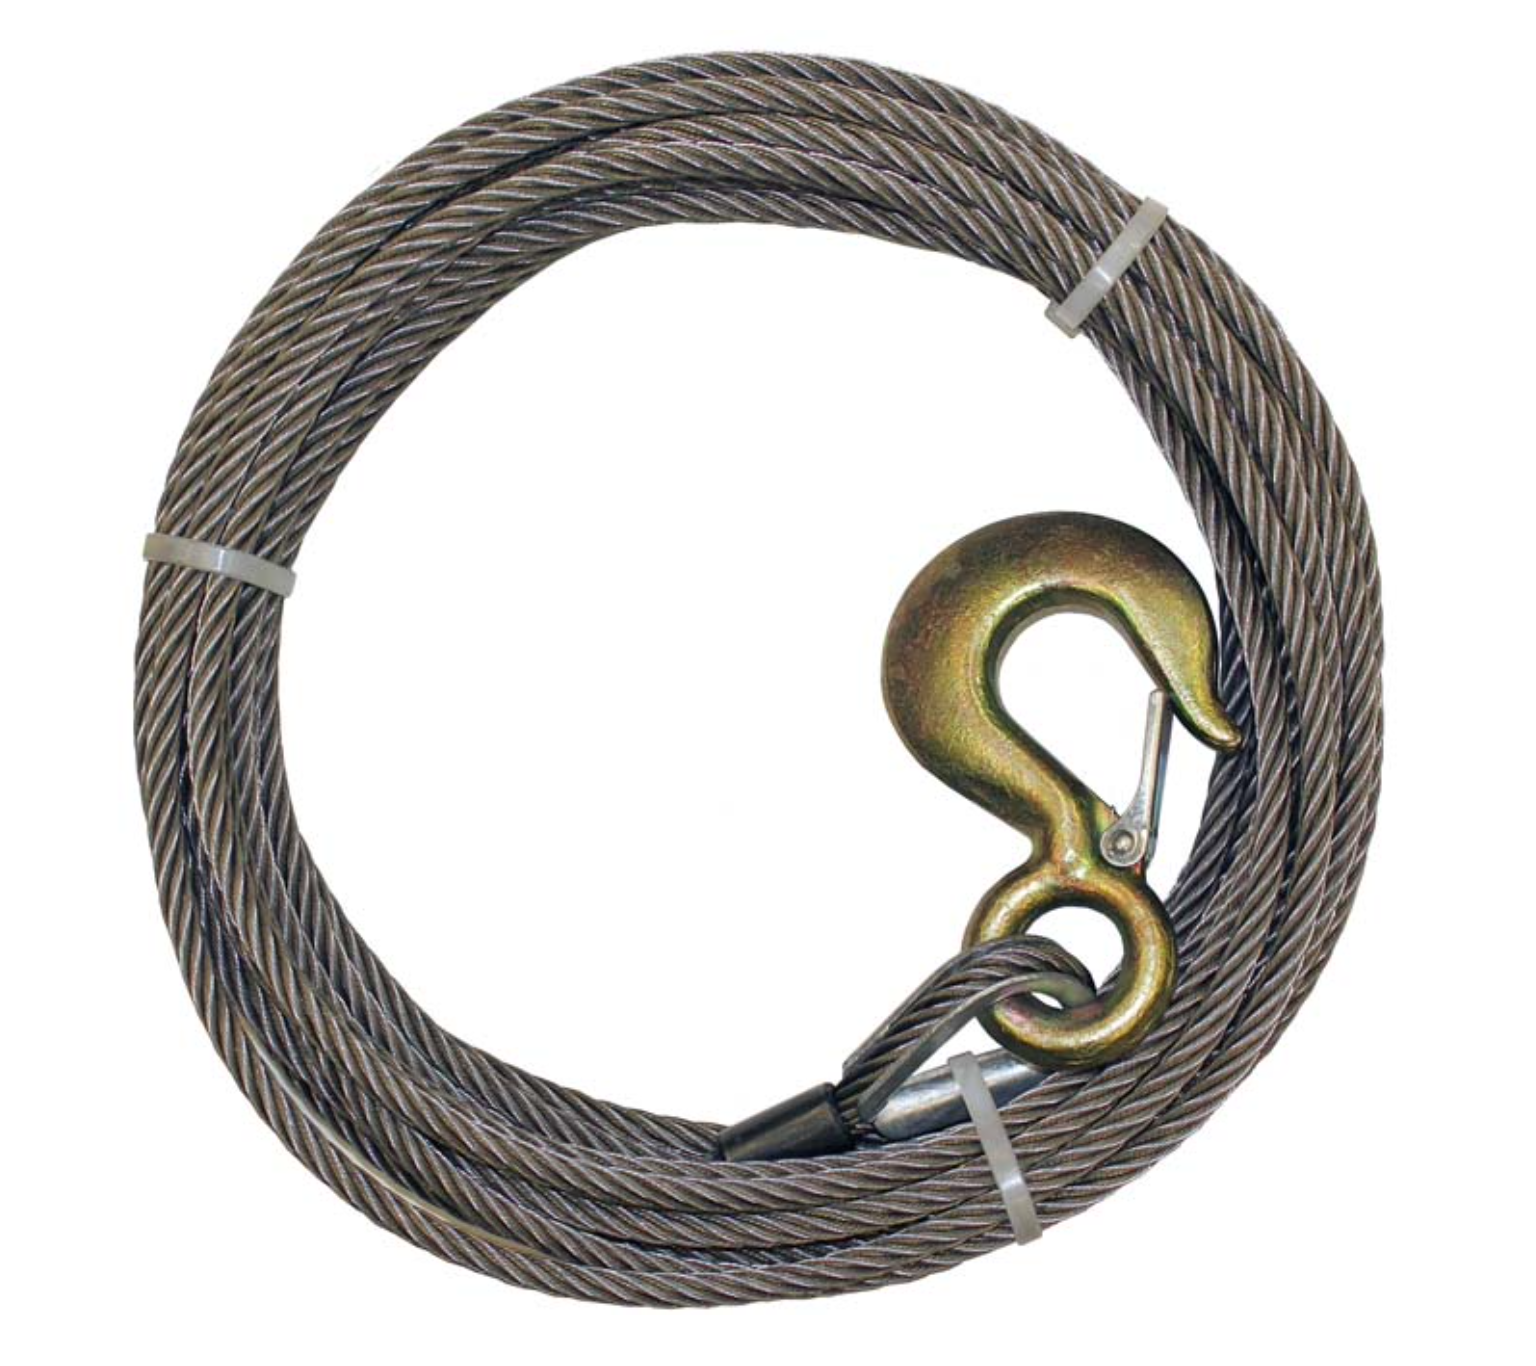 B/A Products 3/8" x 100' Fiber Core Winch Cable with Swivel Hook